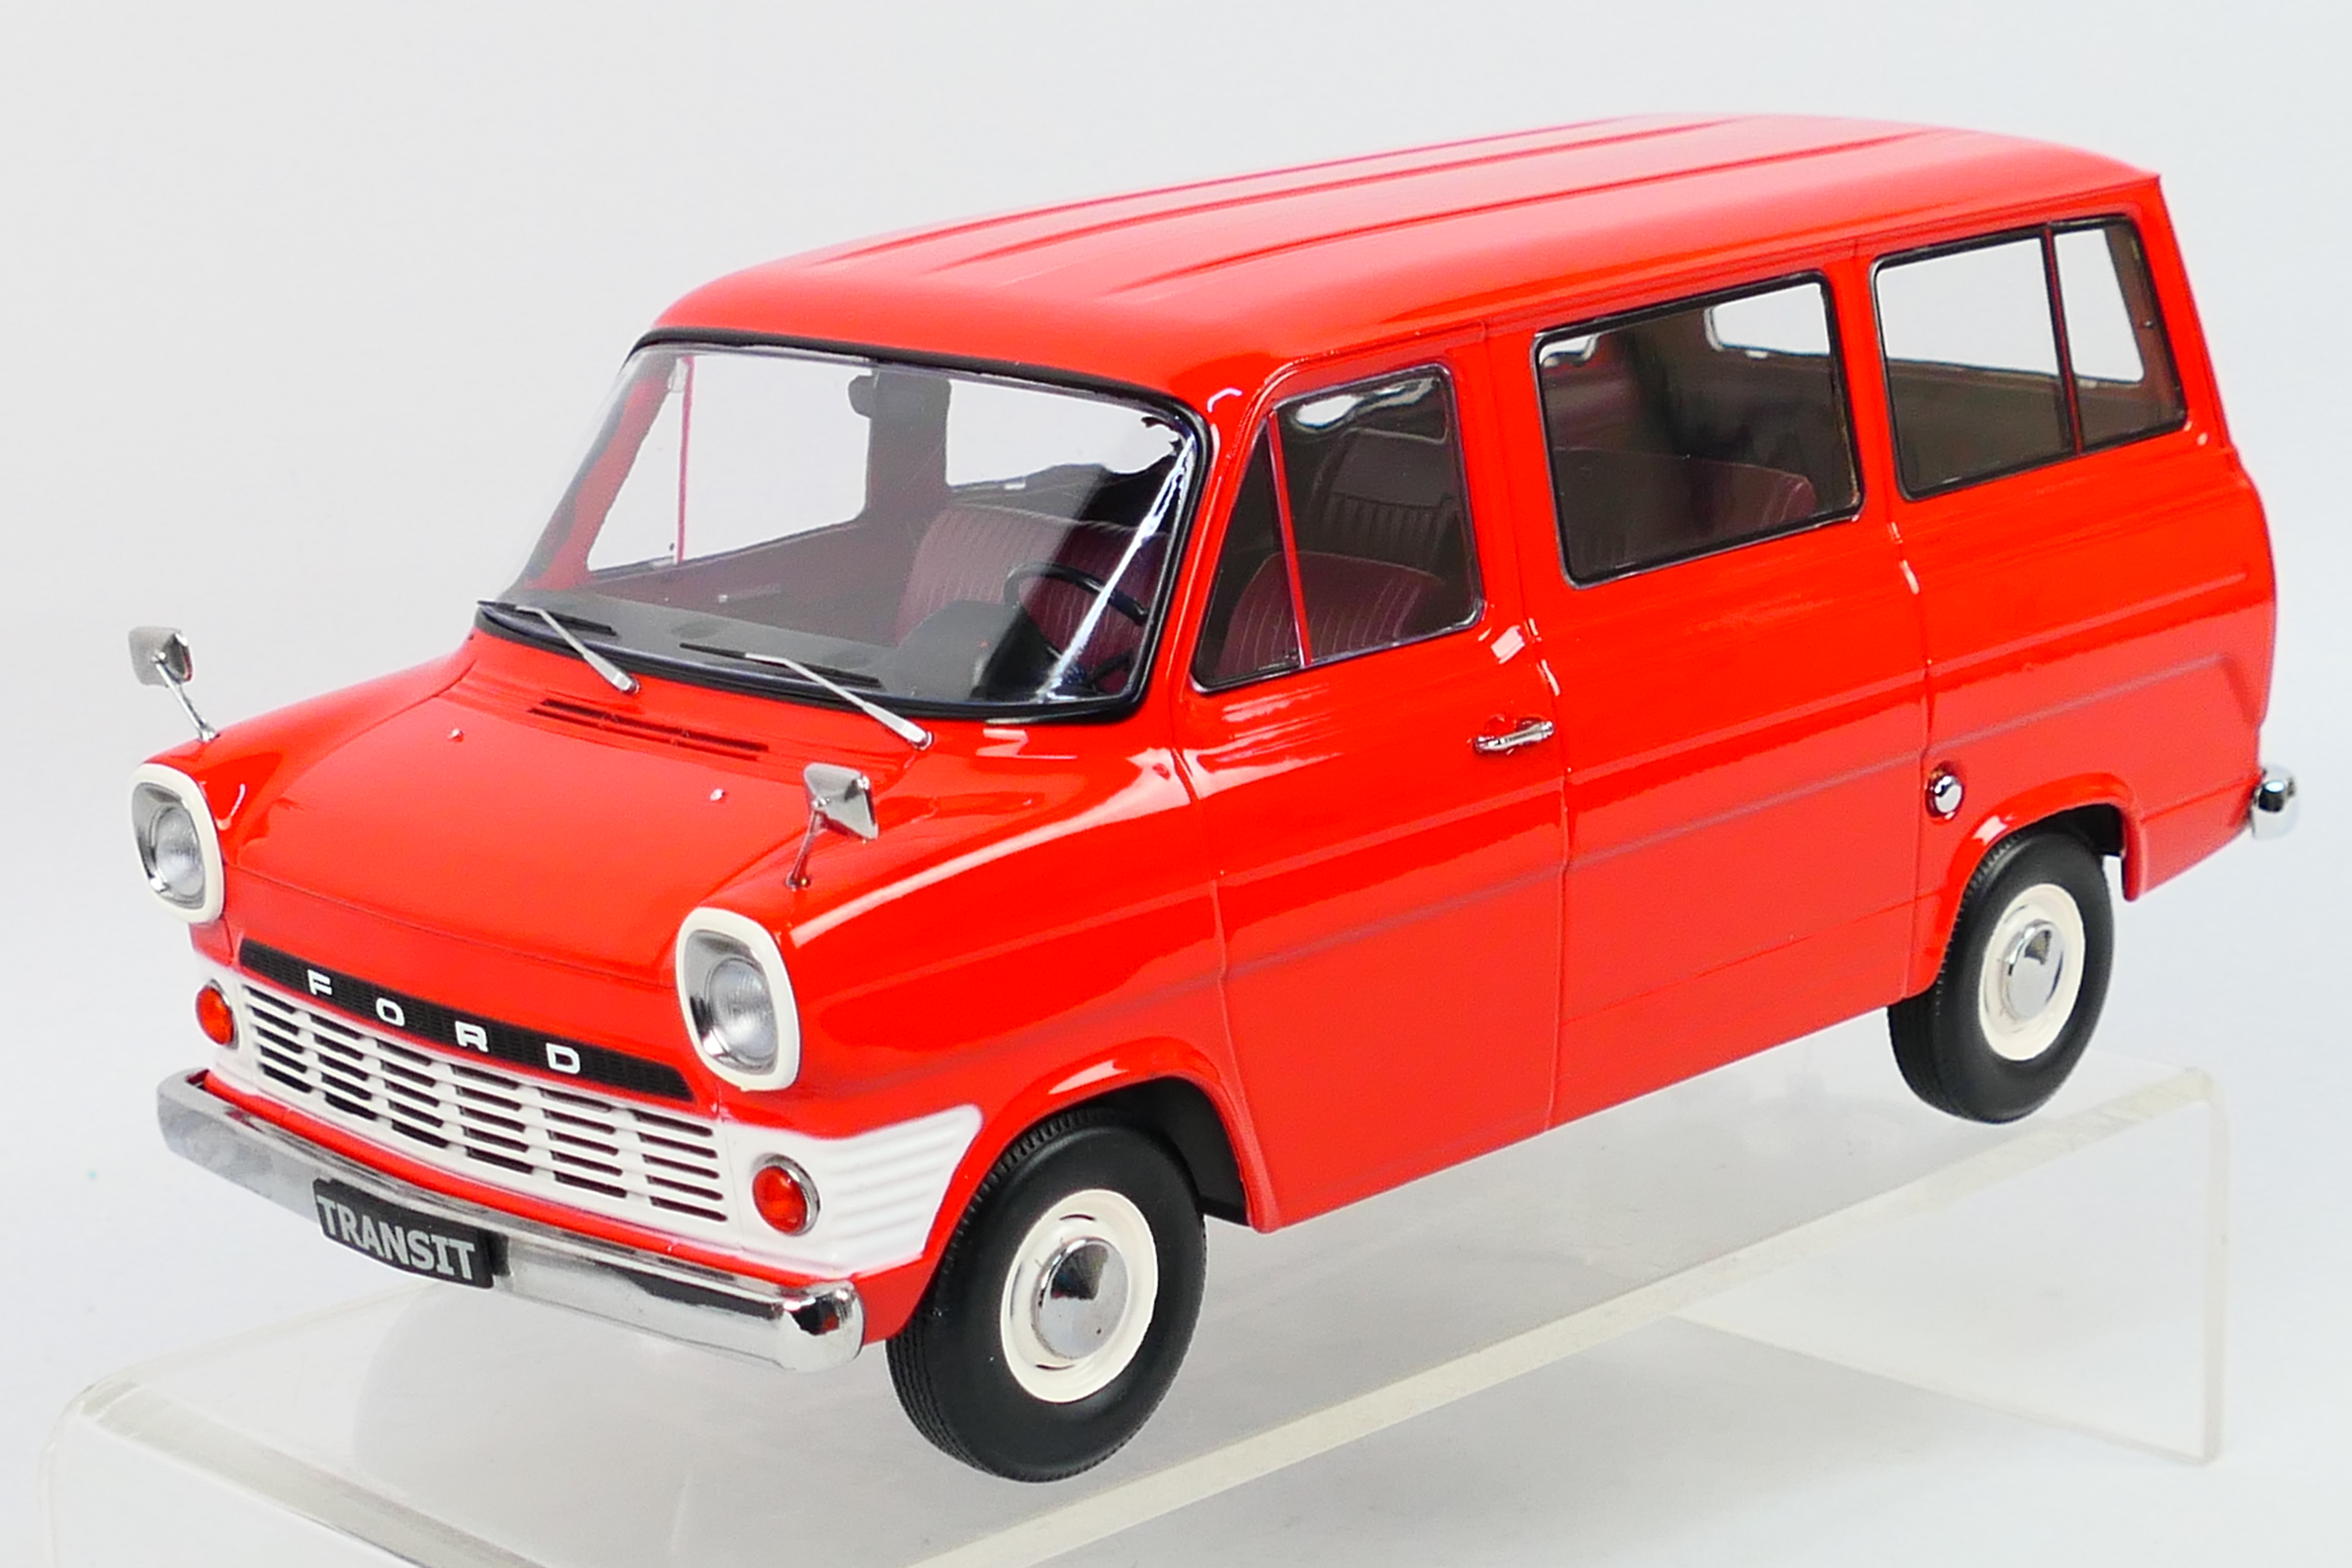 KK scale - A boxed Limited Edition 1:18 scale KK SCale #KKDC180463 1965 Ford Transit Bus. - Image 2 of 5